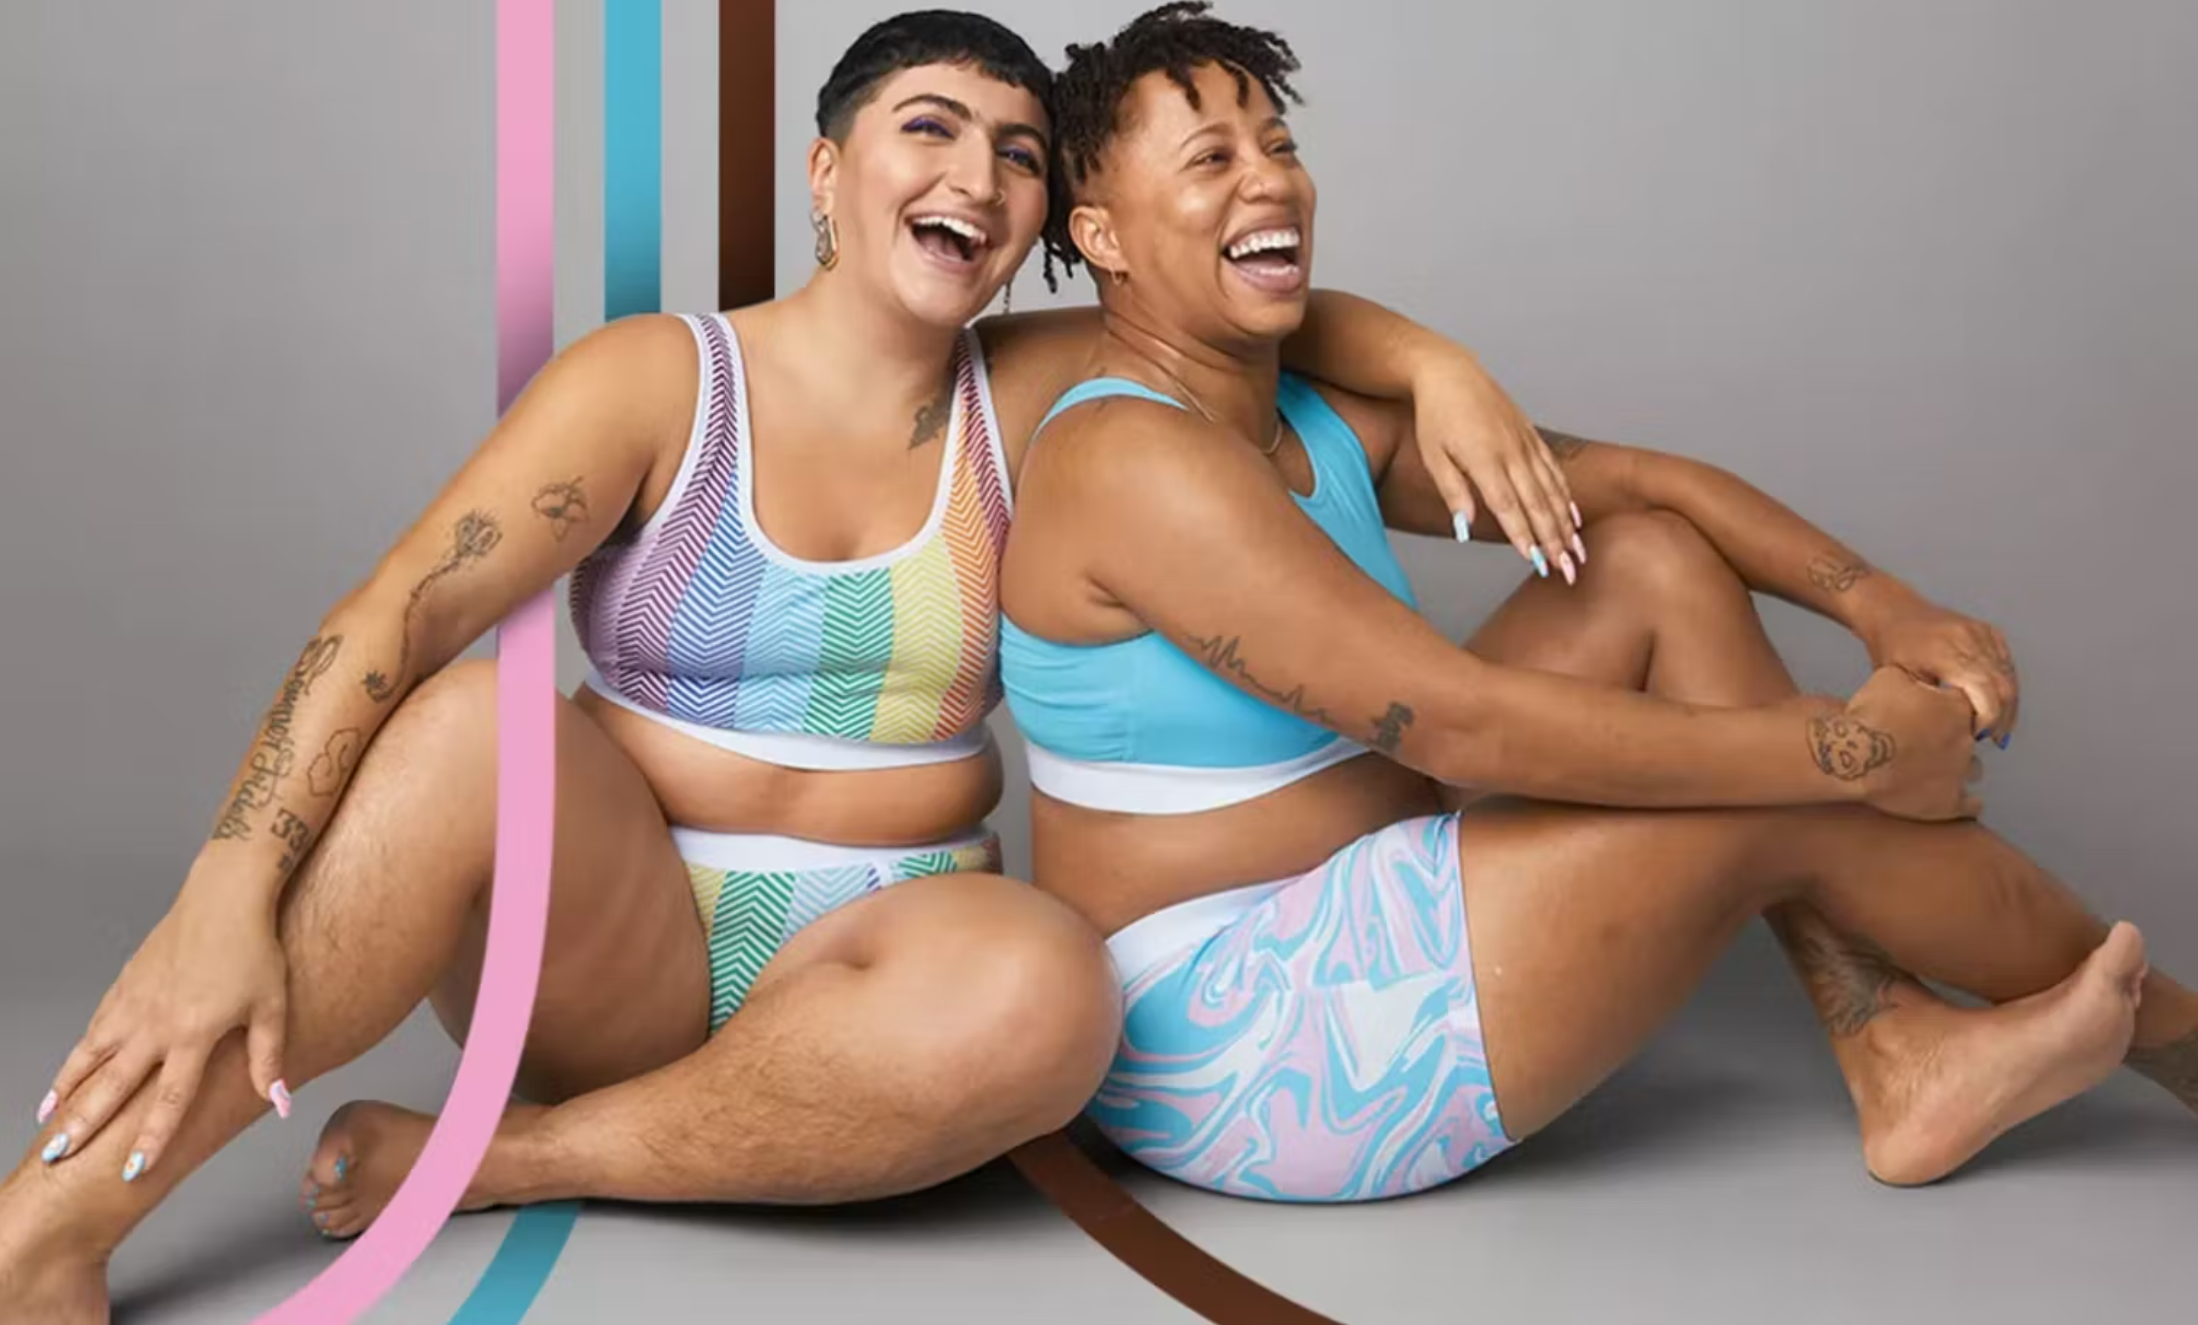 Target Launches Collaboration with Two Queer-Owned, Female-Founded Brands, dapperQ